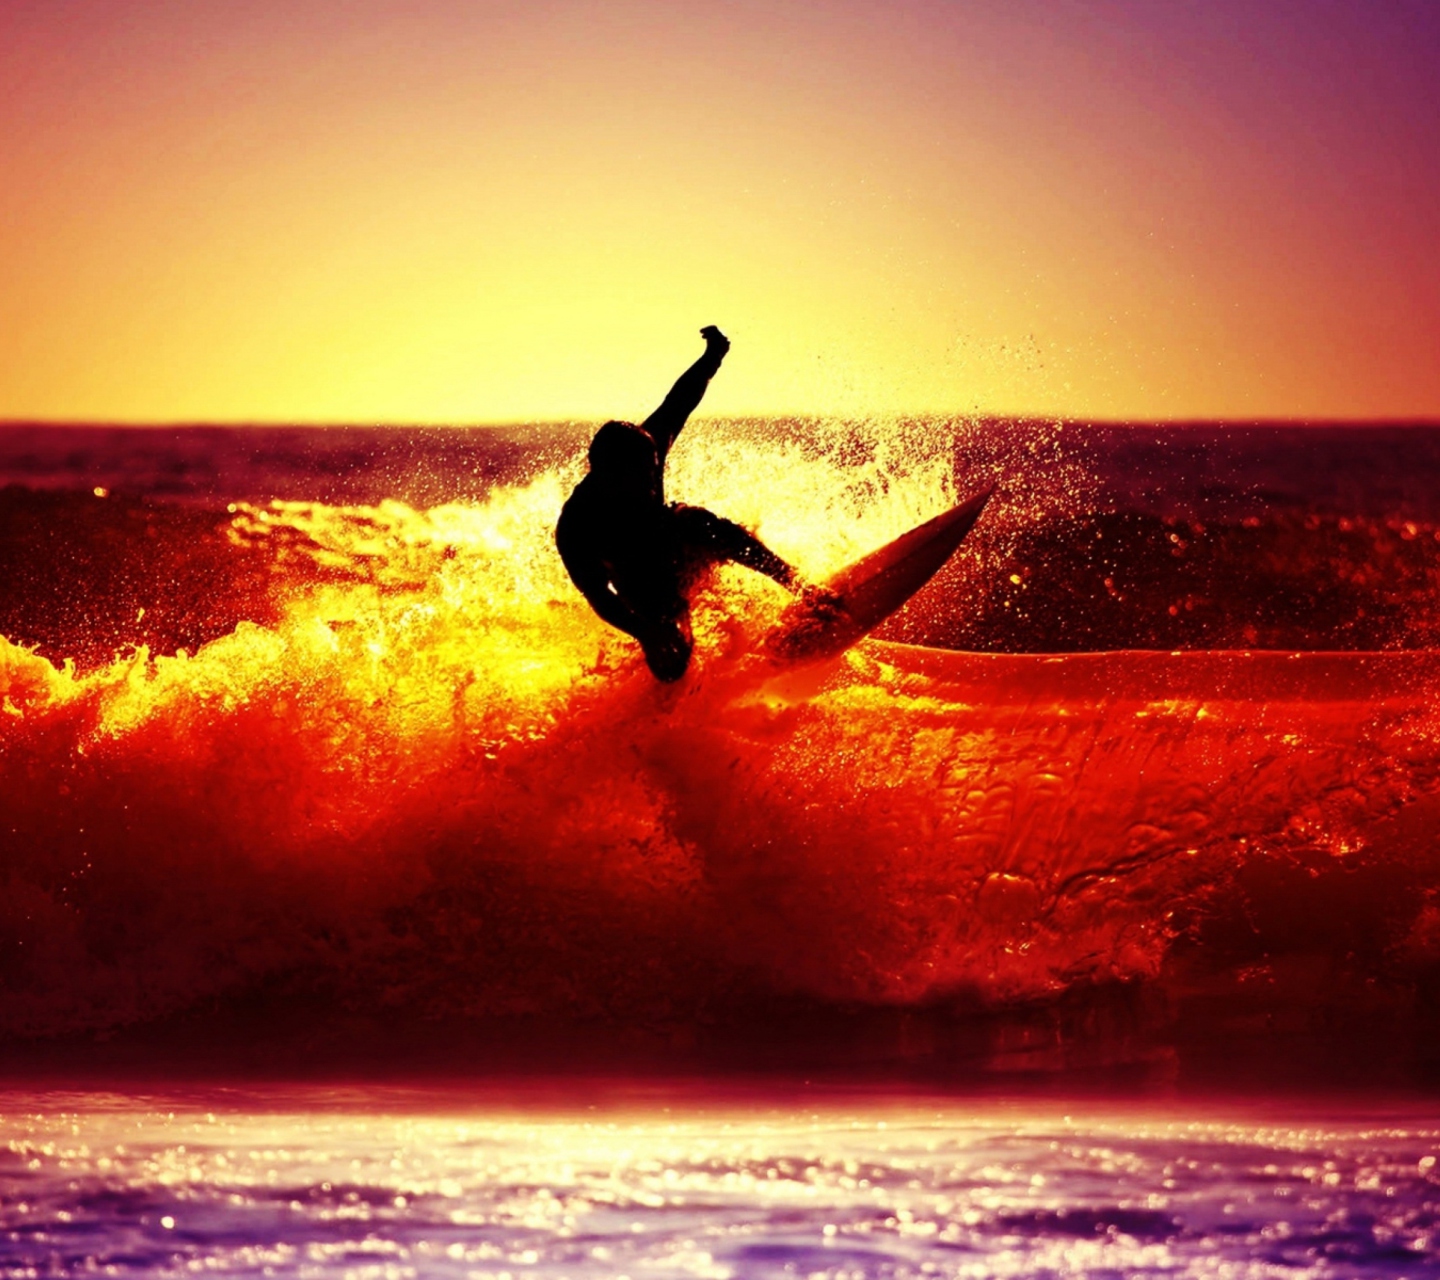 Surfing At Sunset wallpaper 1440x1280